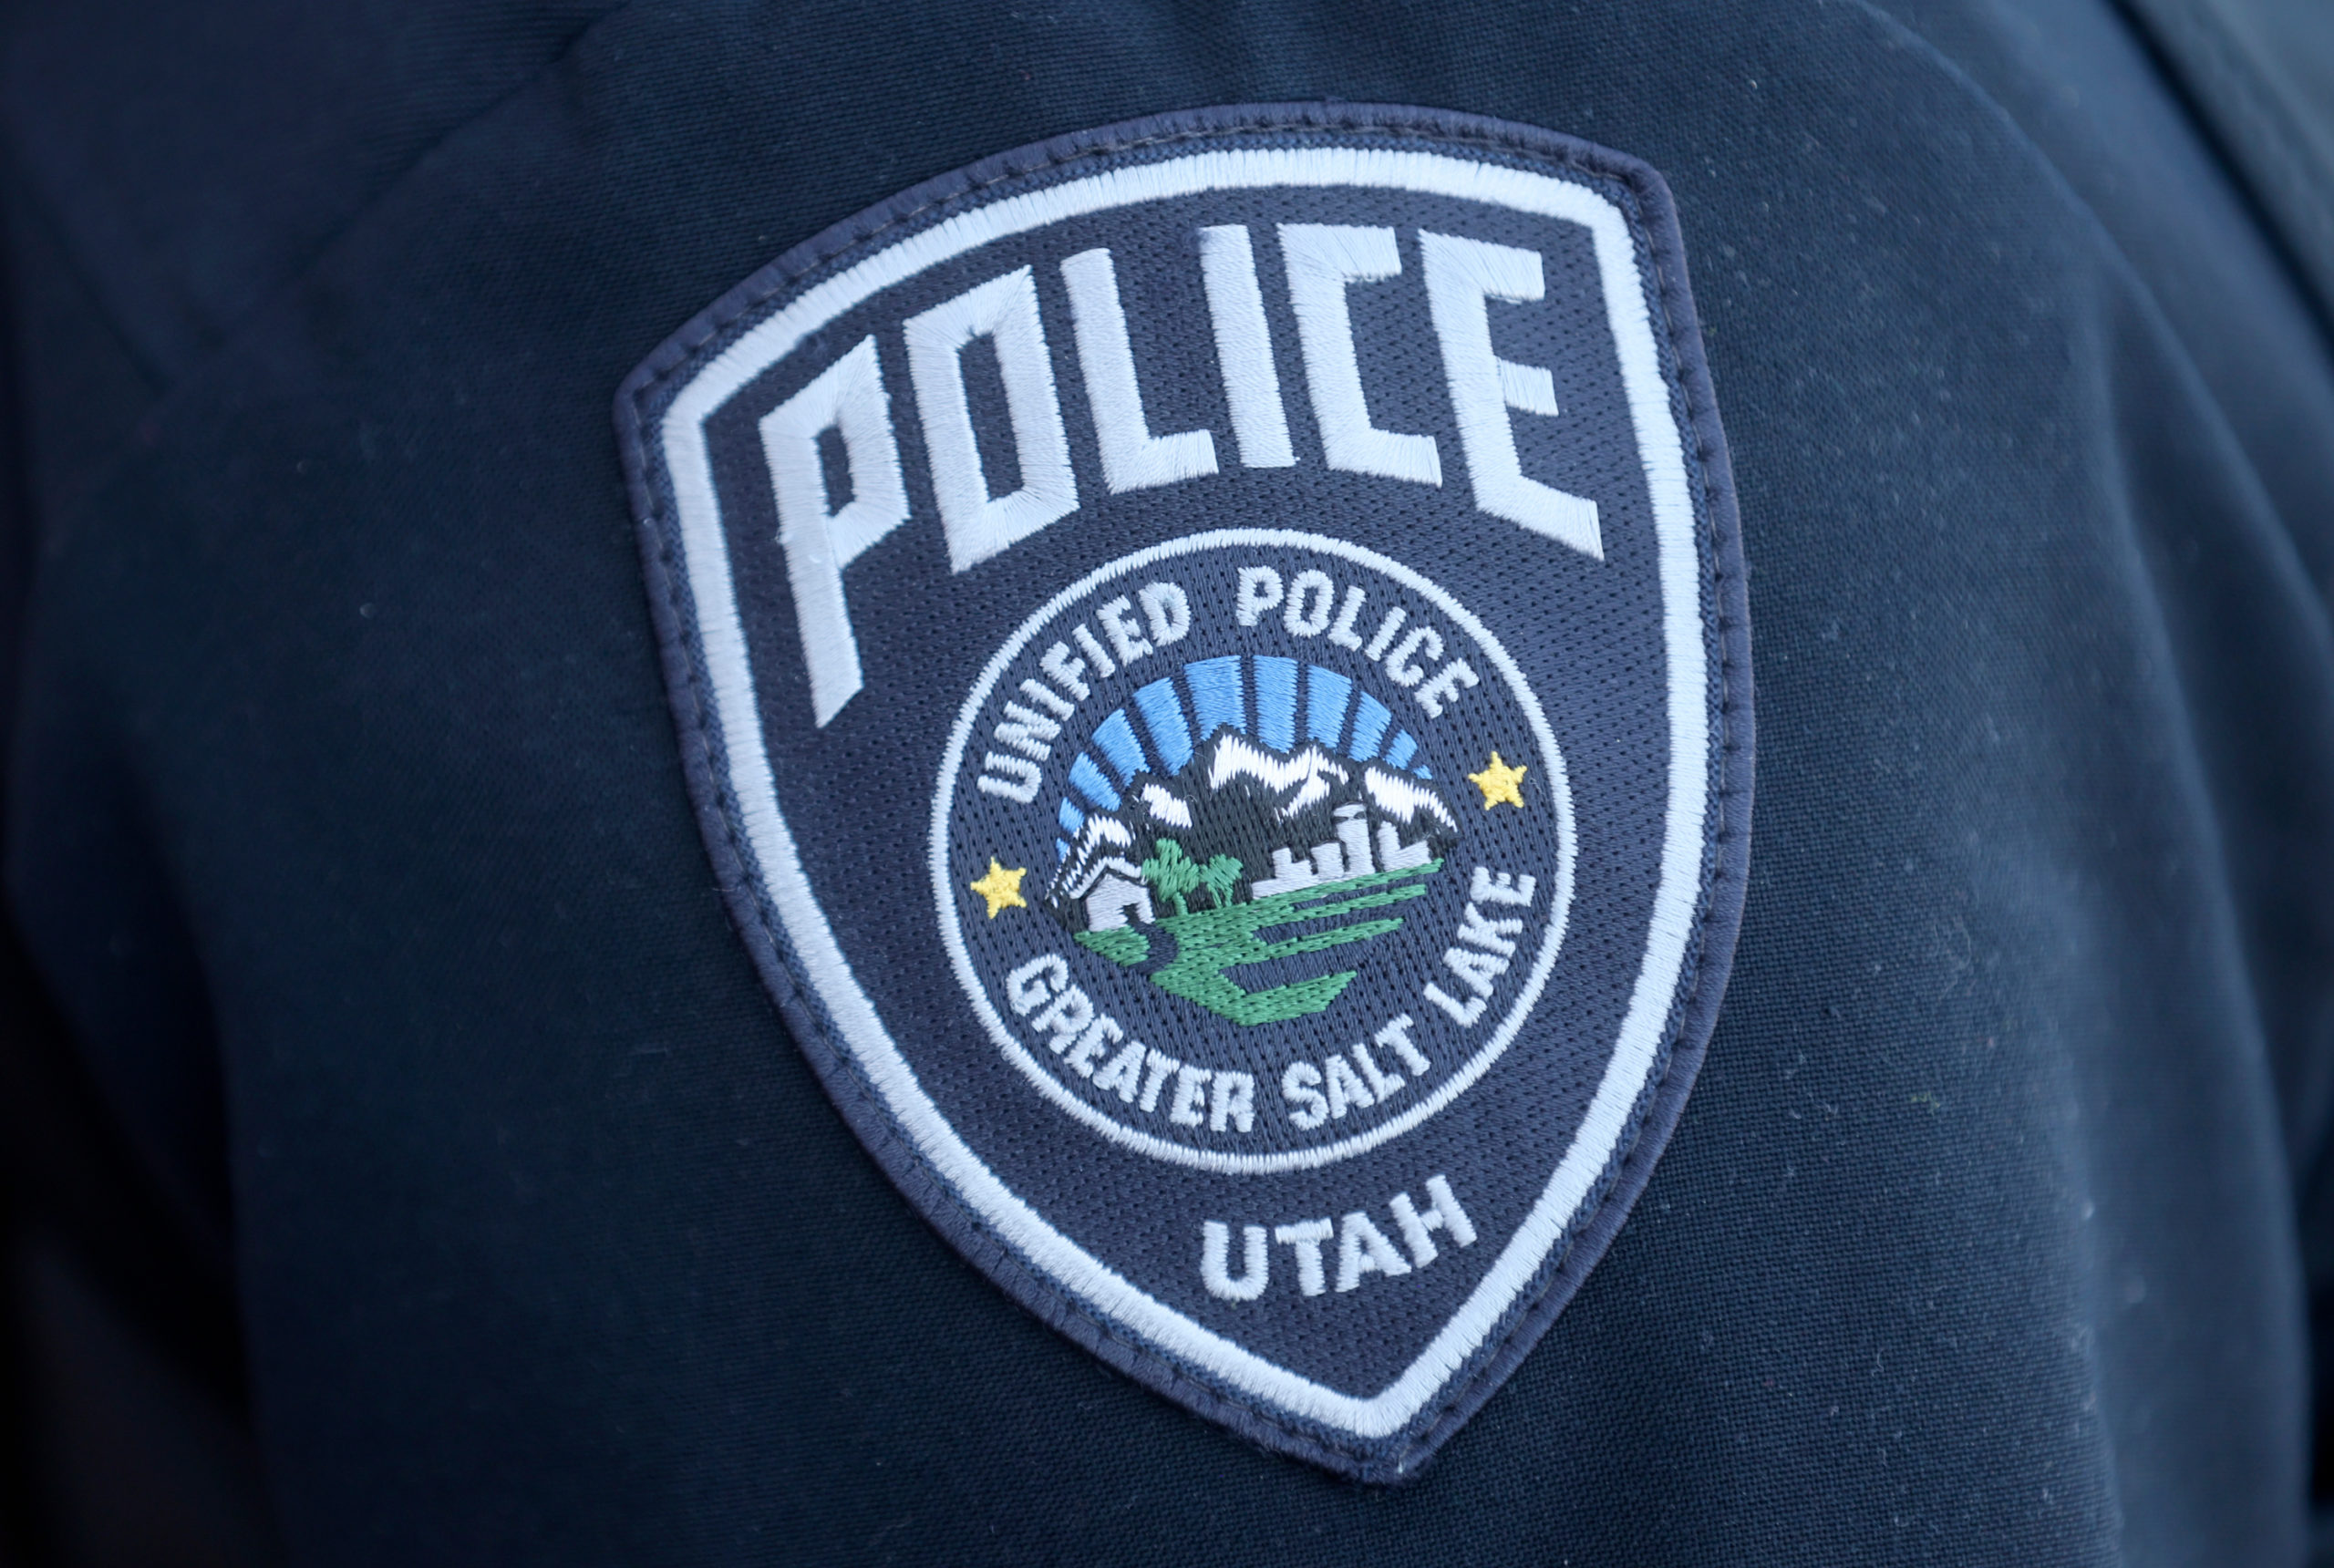 A proposed bill would nix the Unified Police Department....